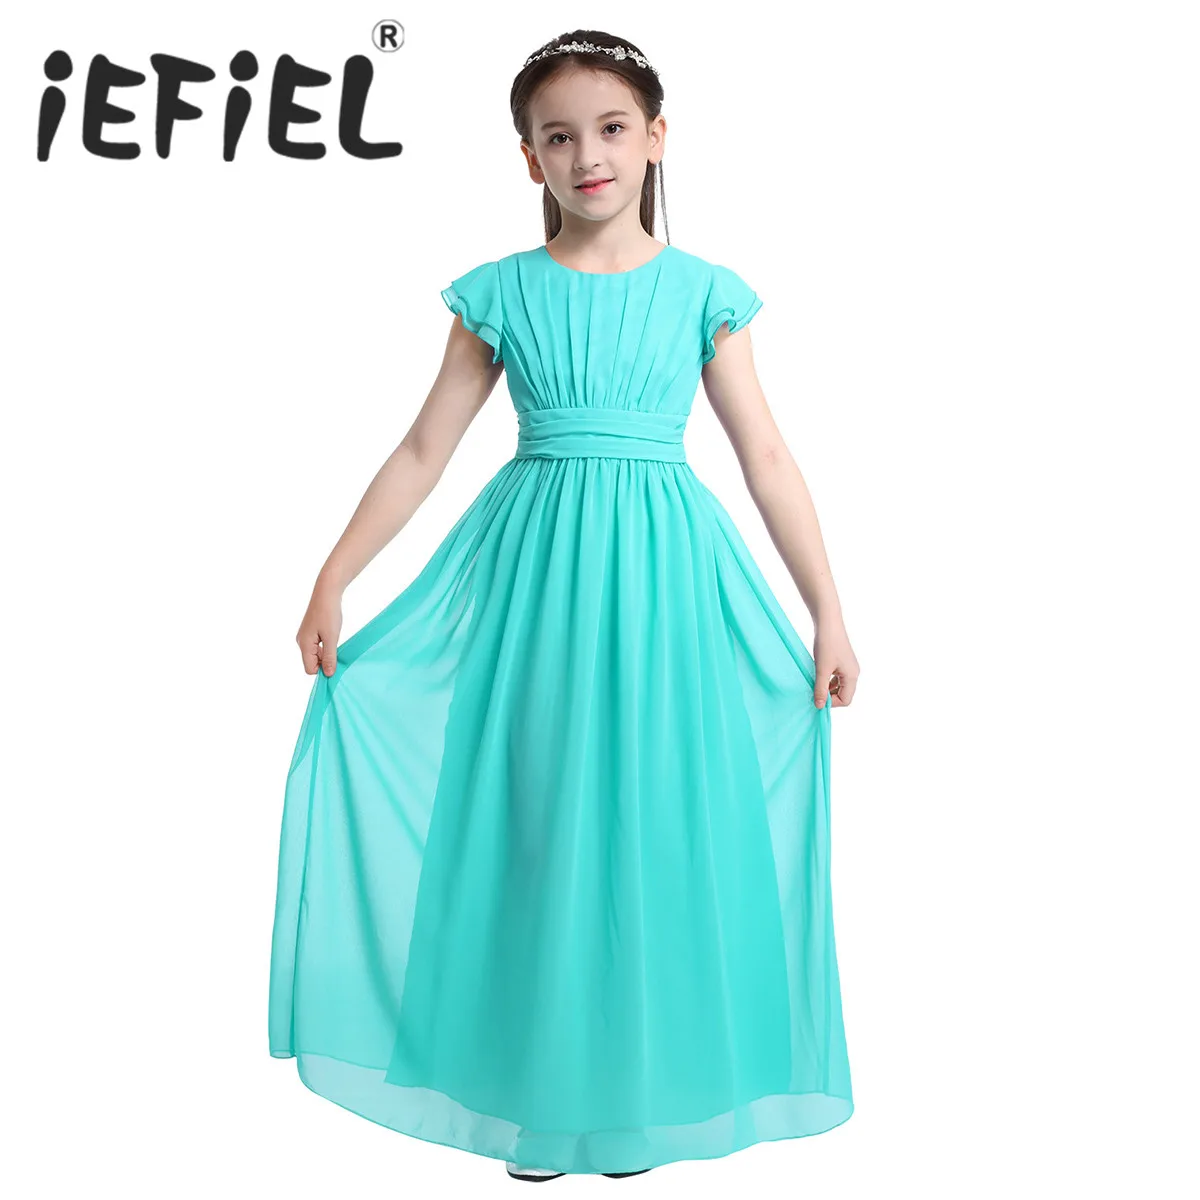 

iEFiEL Sleeveless Kids Teenage Flower Girl Dress Floor Length Pageant Wedding Party Formal Occassion Wedding Girls Tulle Dress